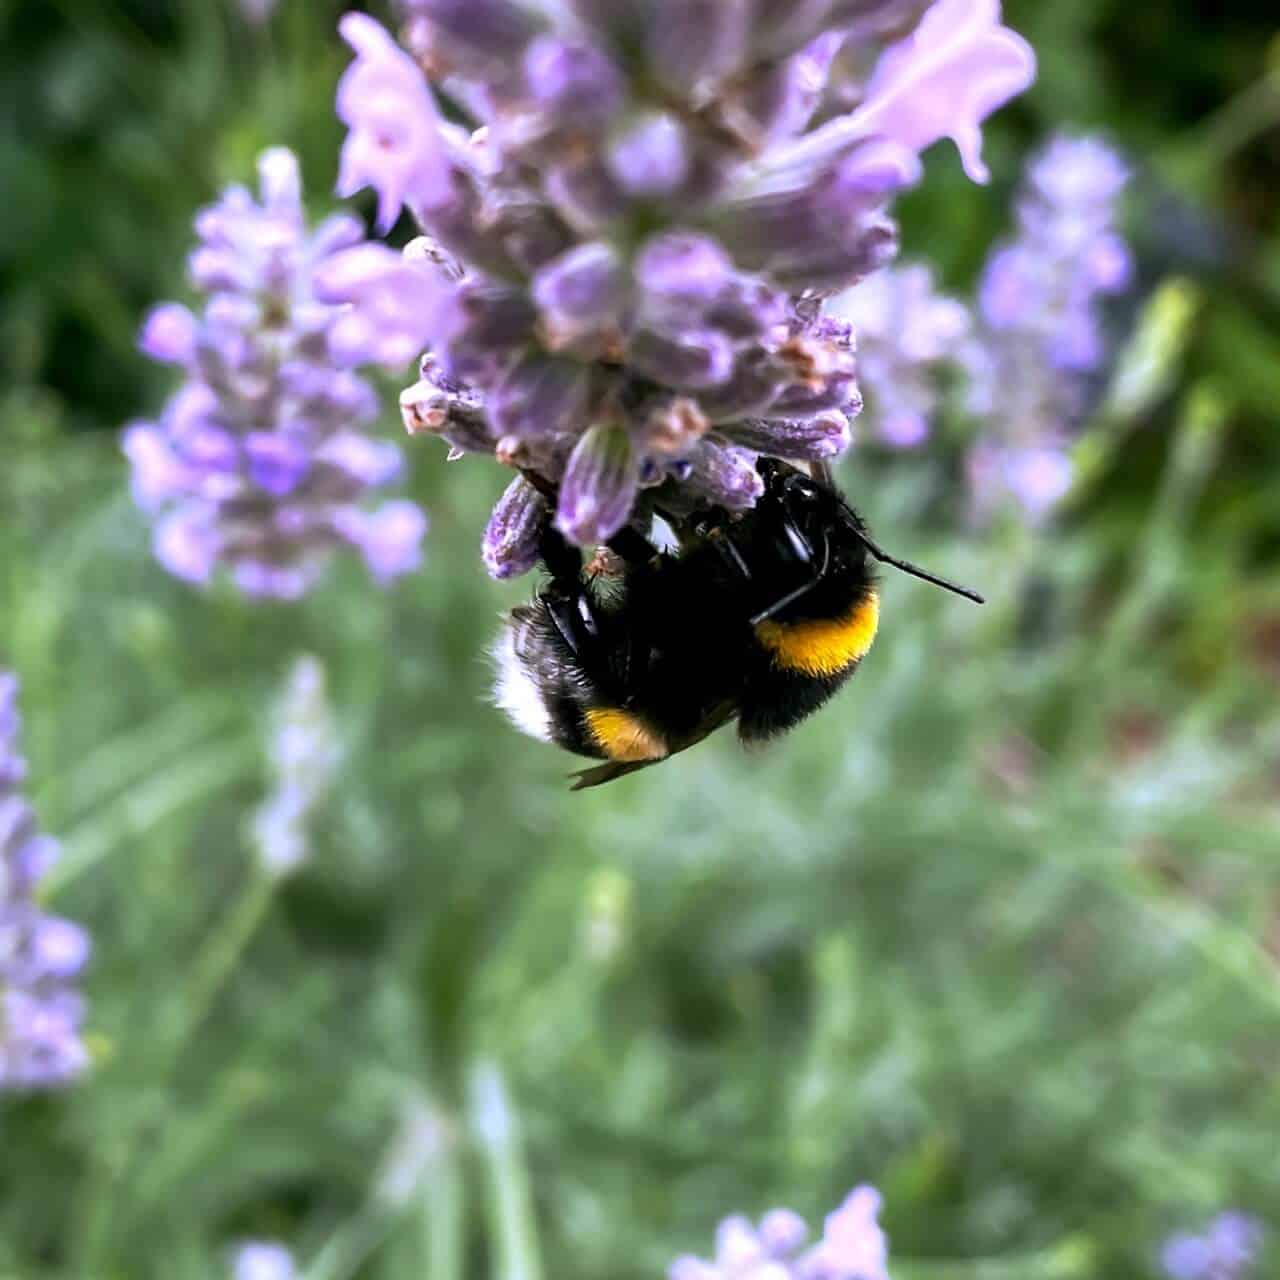 Bumble bee on levender flower